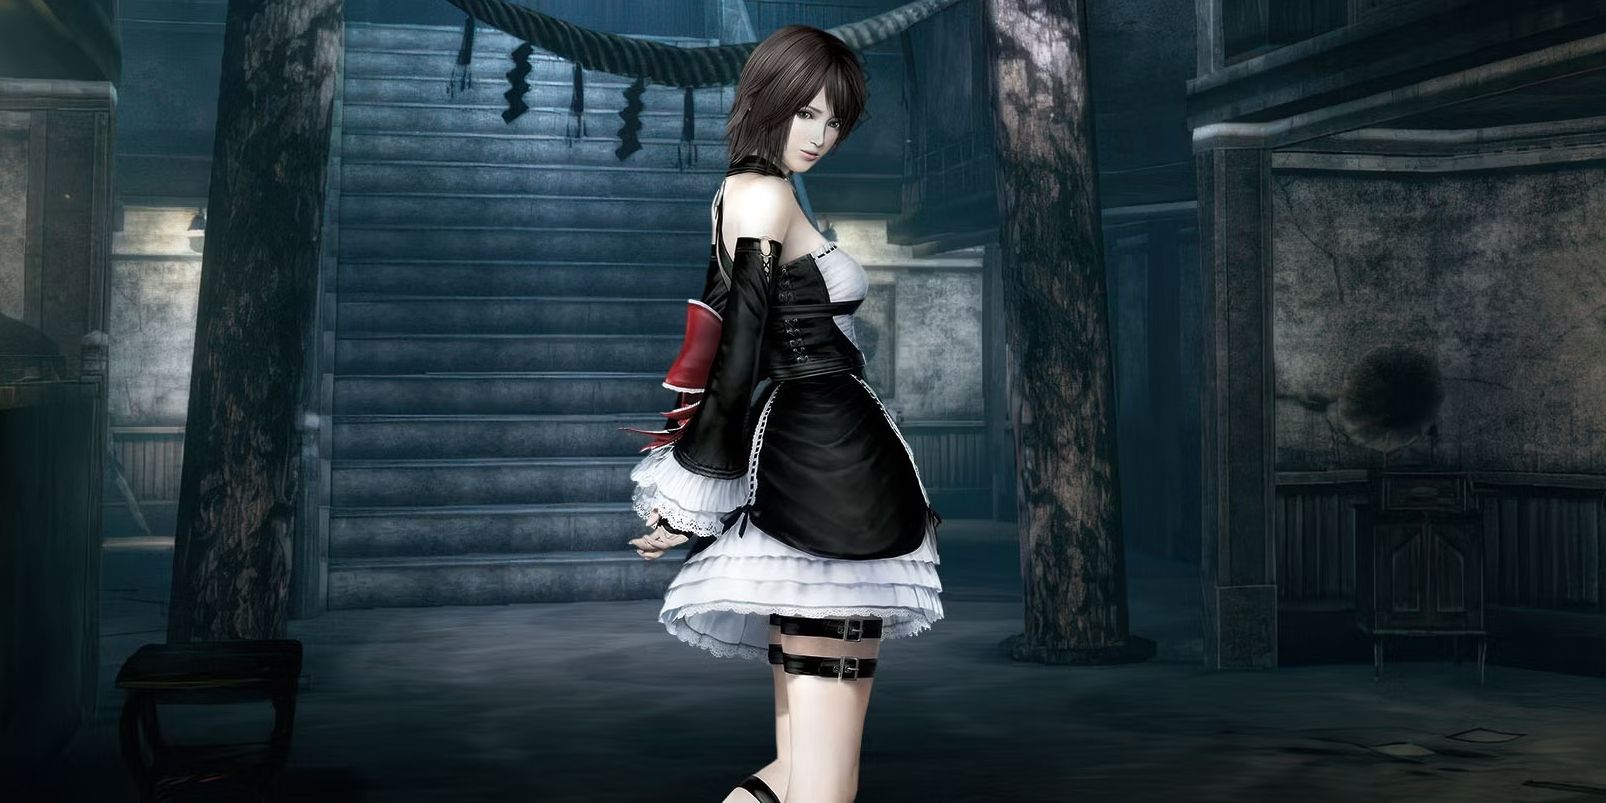 Ruka using the Marie Rose outfit in Fatal Frame Mask of the Lunar Eclipse Remaster. Behind her is a dark hallway with an old torii gate.